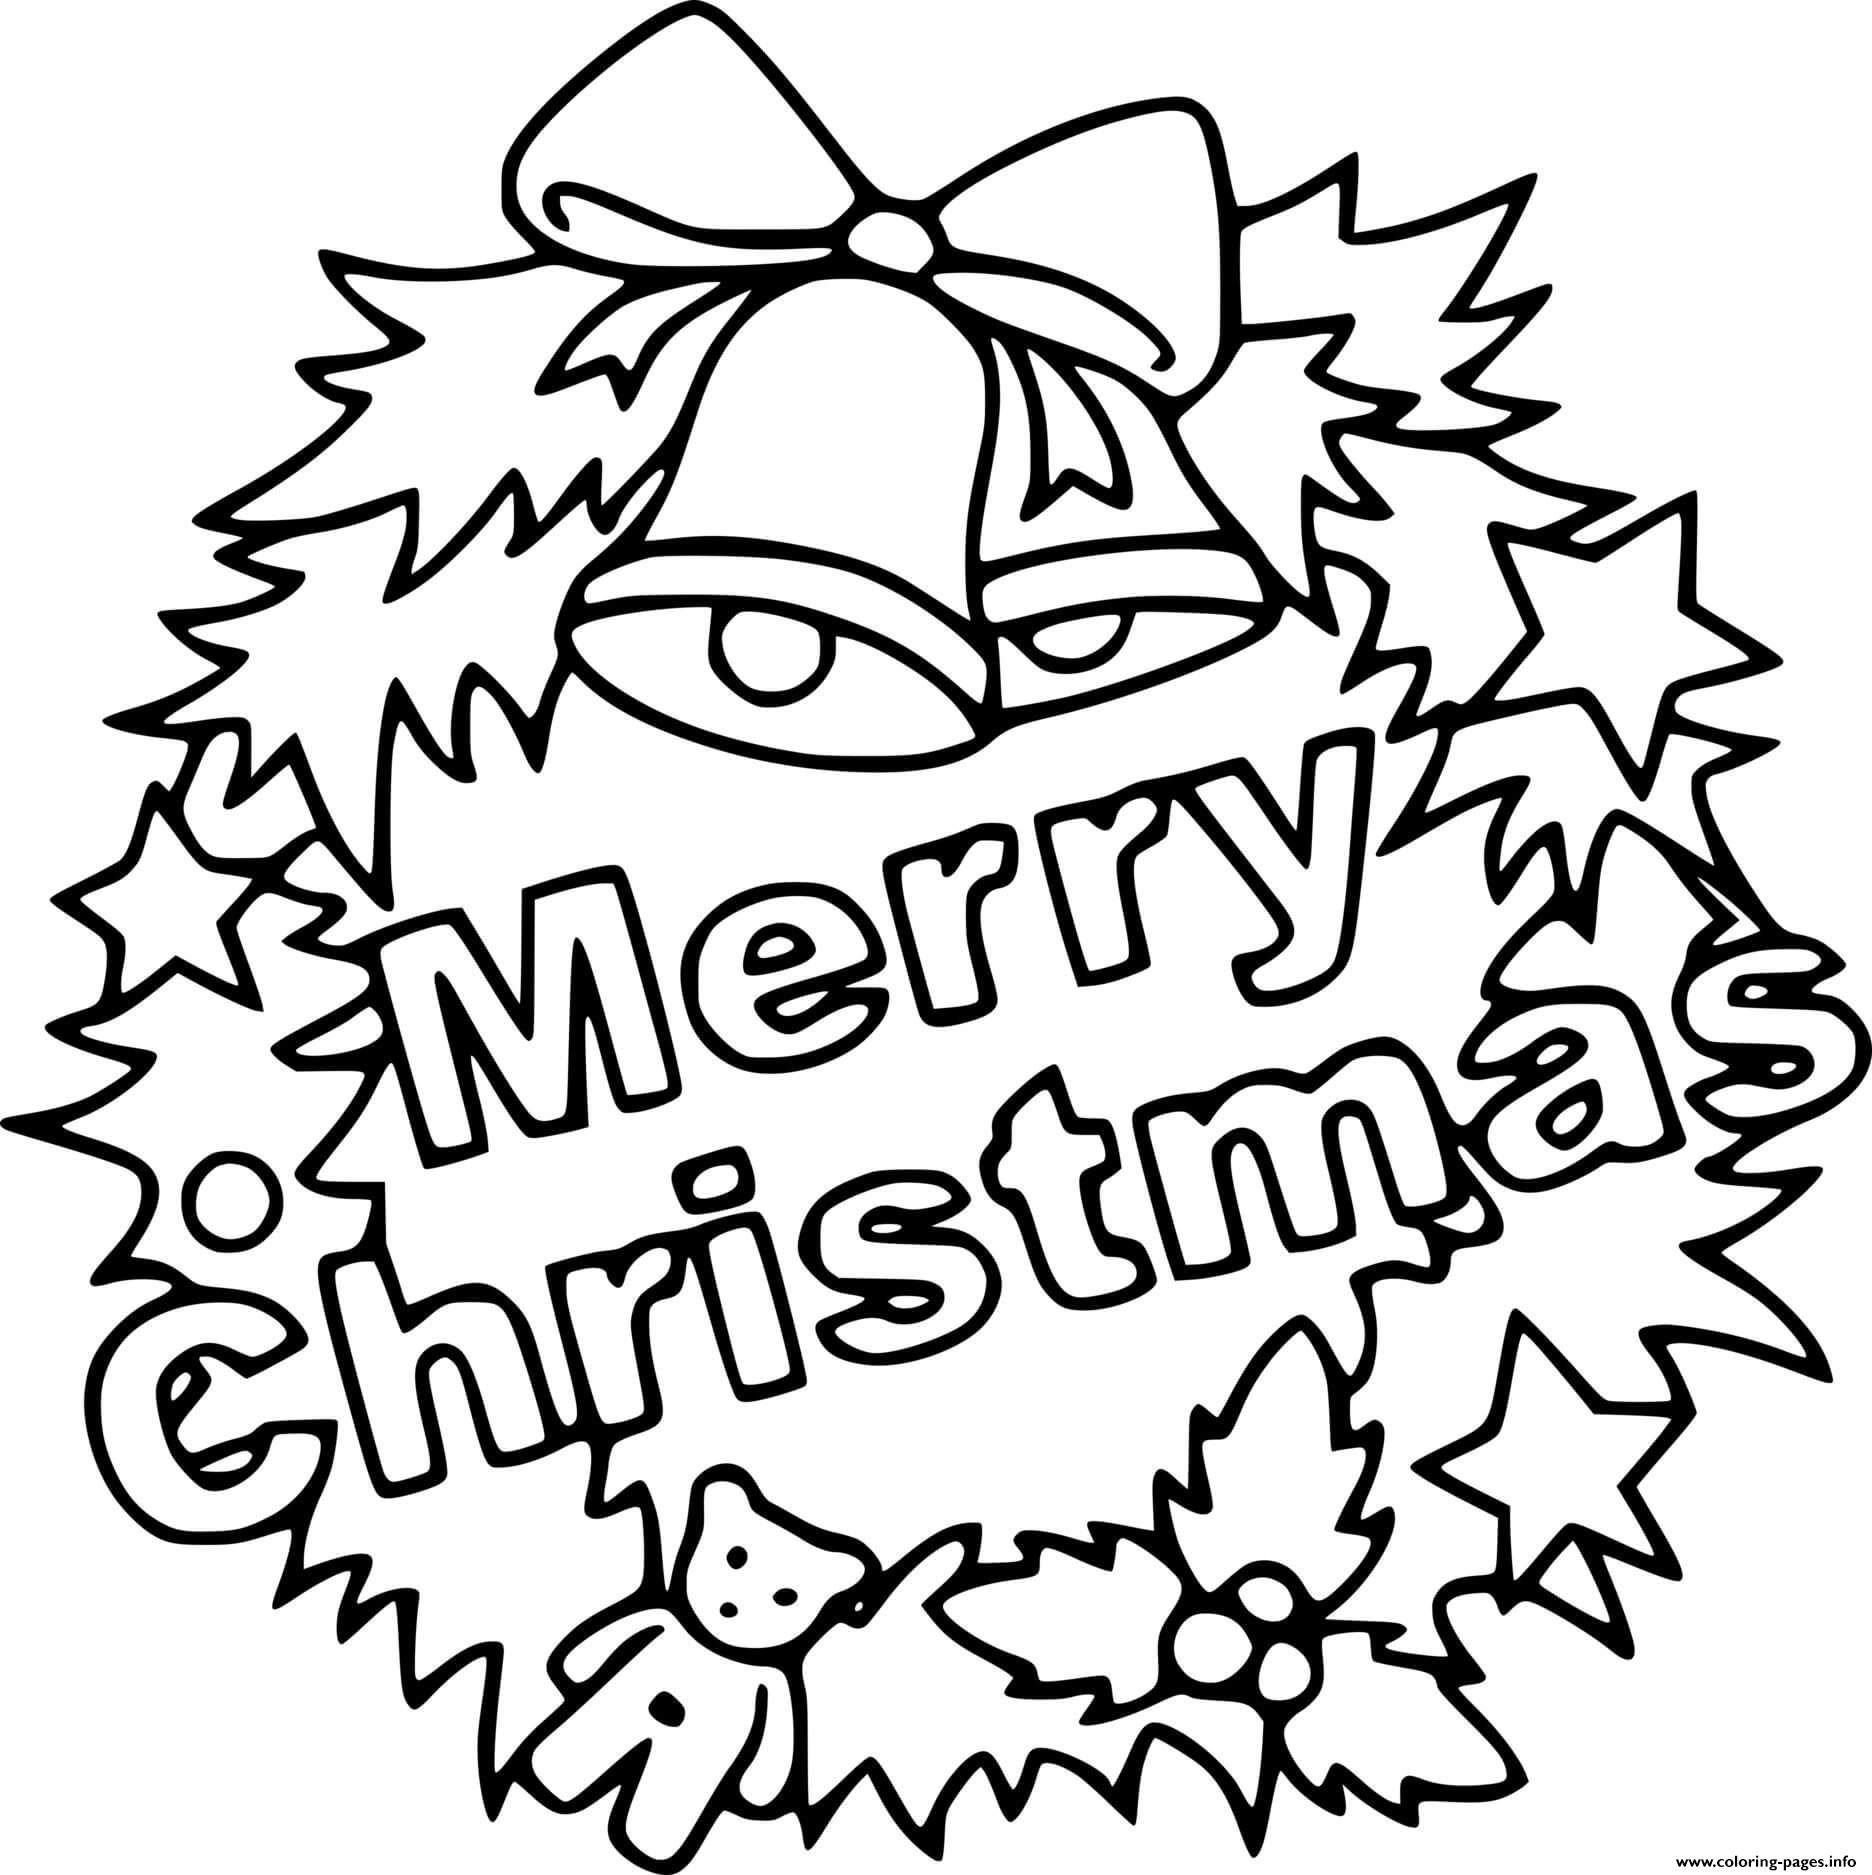 Merry Christmas Wreath coloring